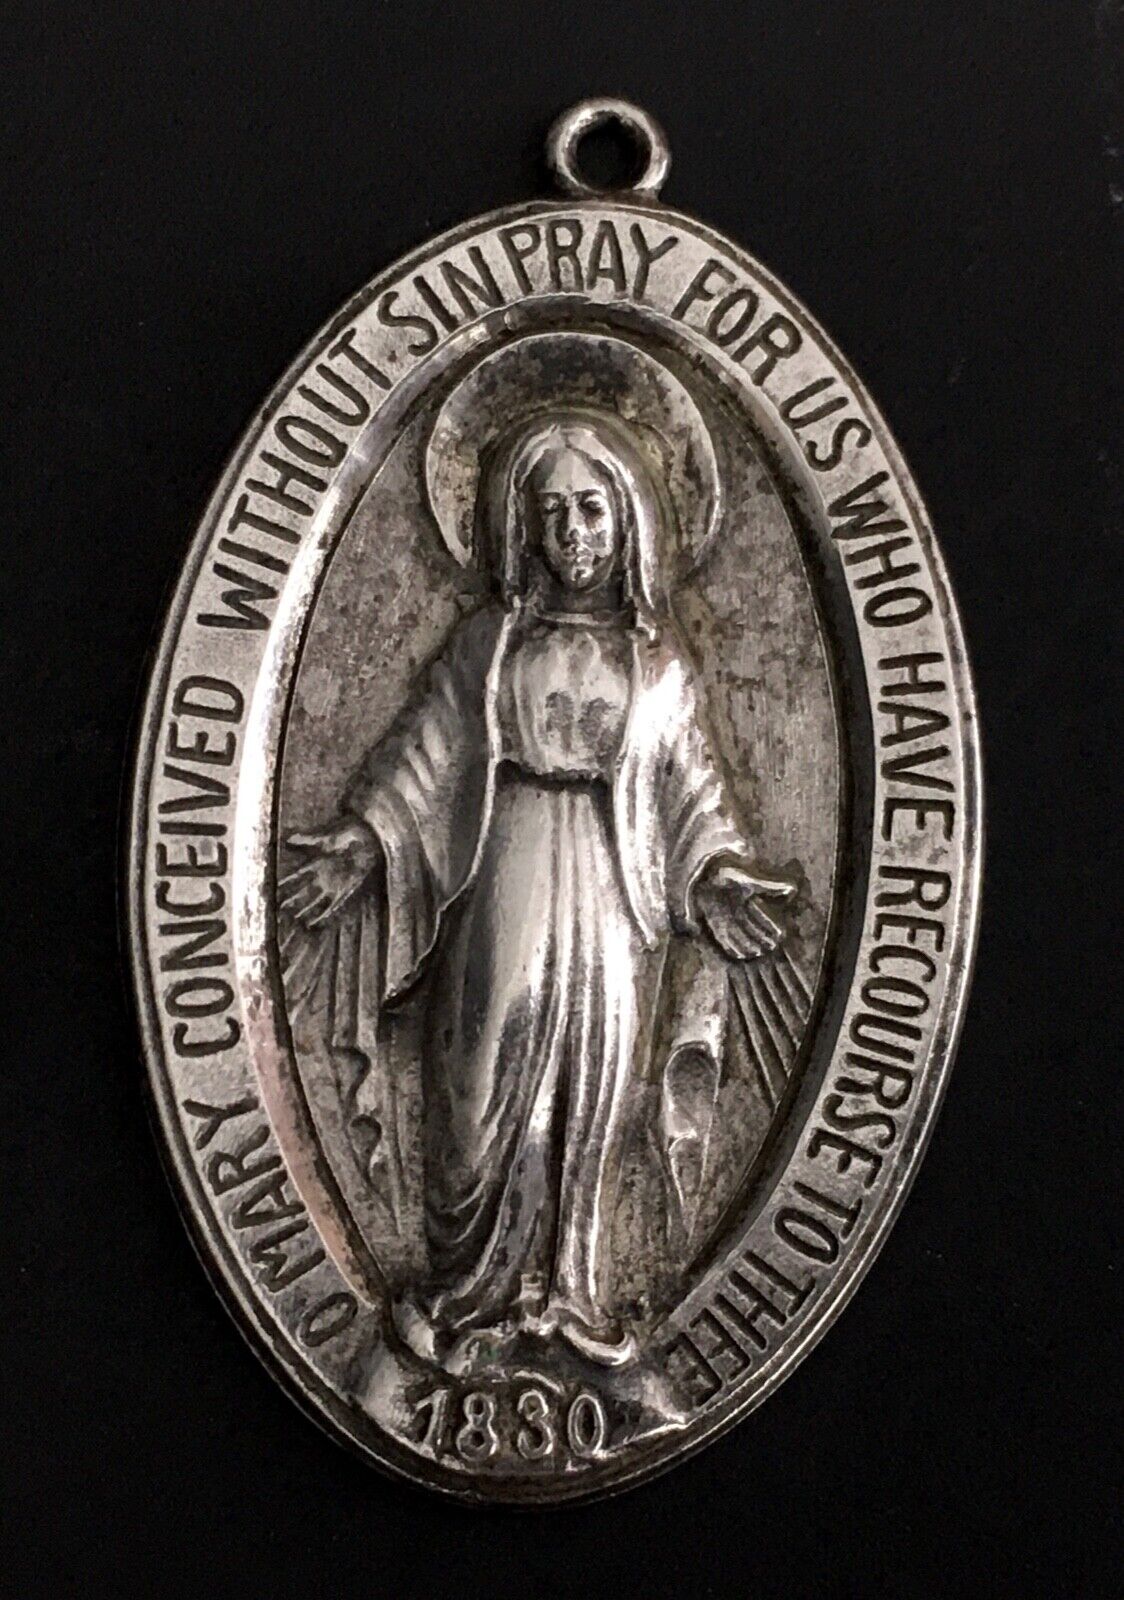 Vintage CHAPEL Sterling Silver  RELIGIOUS CHRISTIAN MARY 1830 Medal, Pendant.